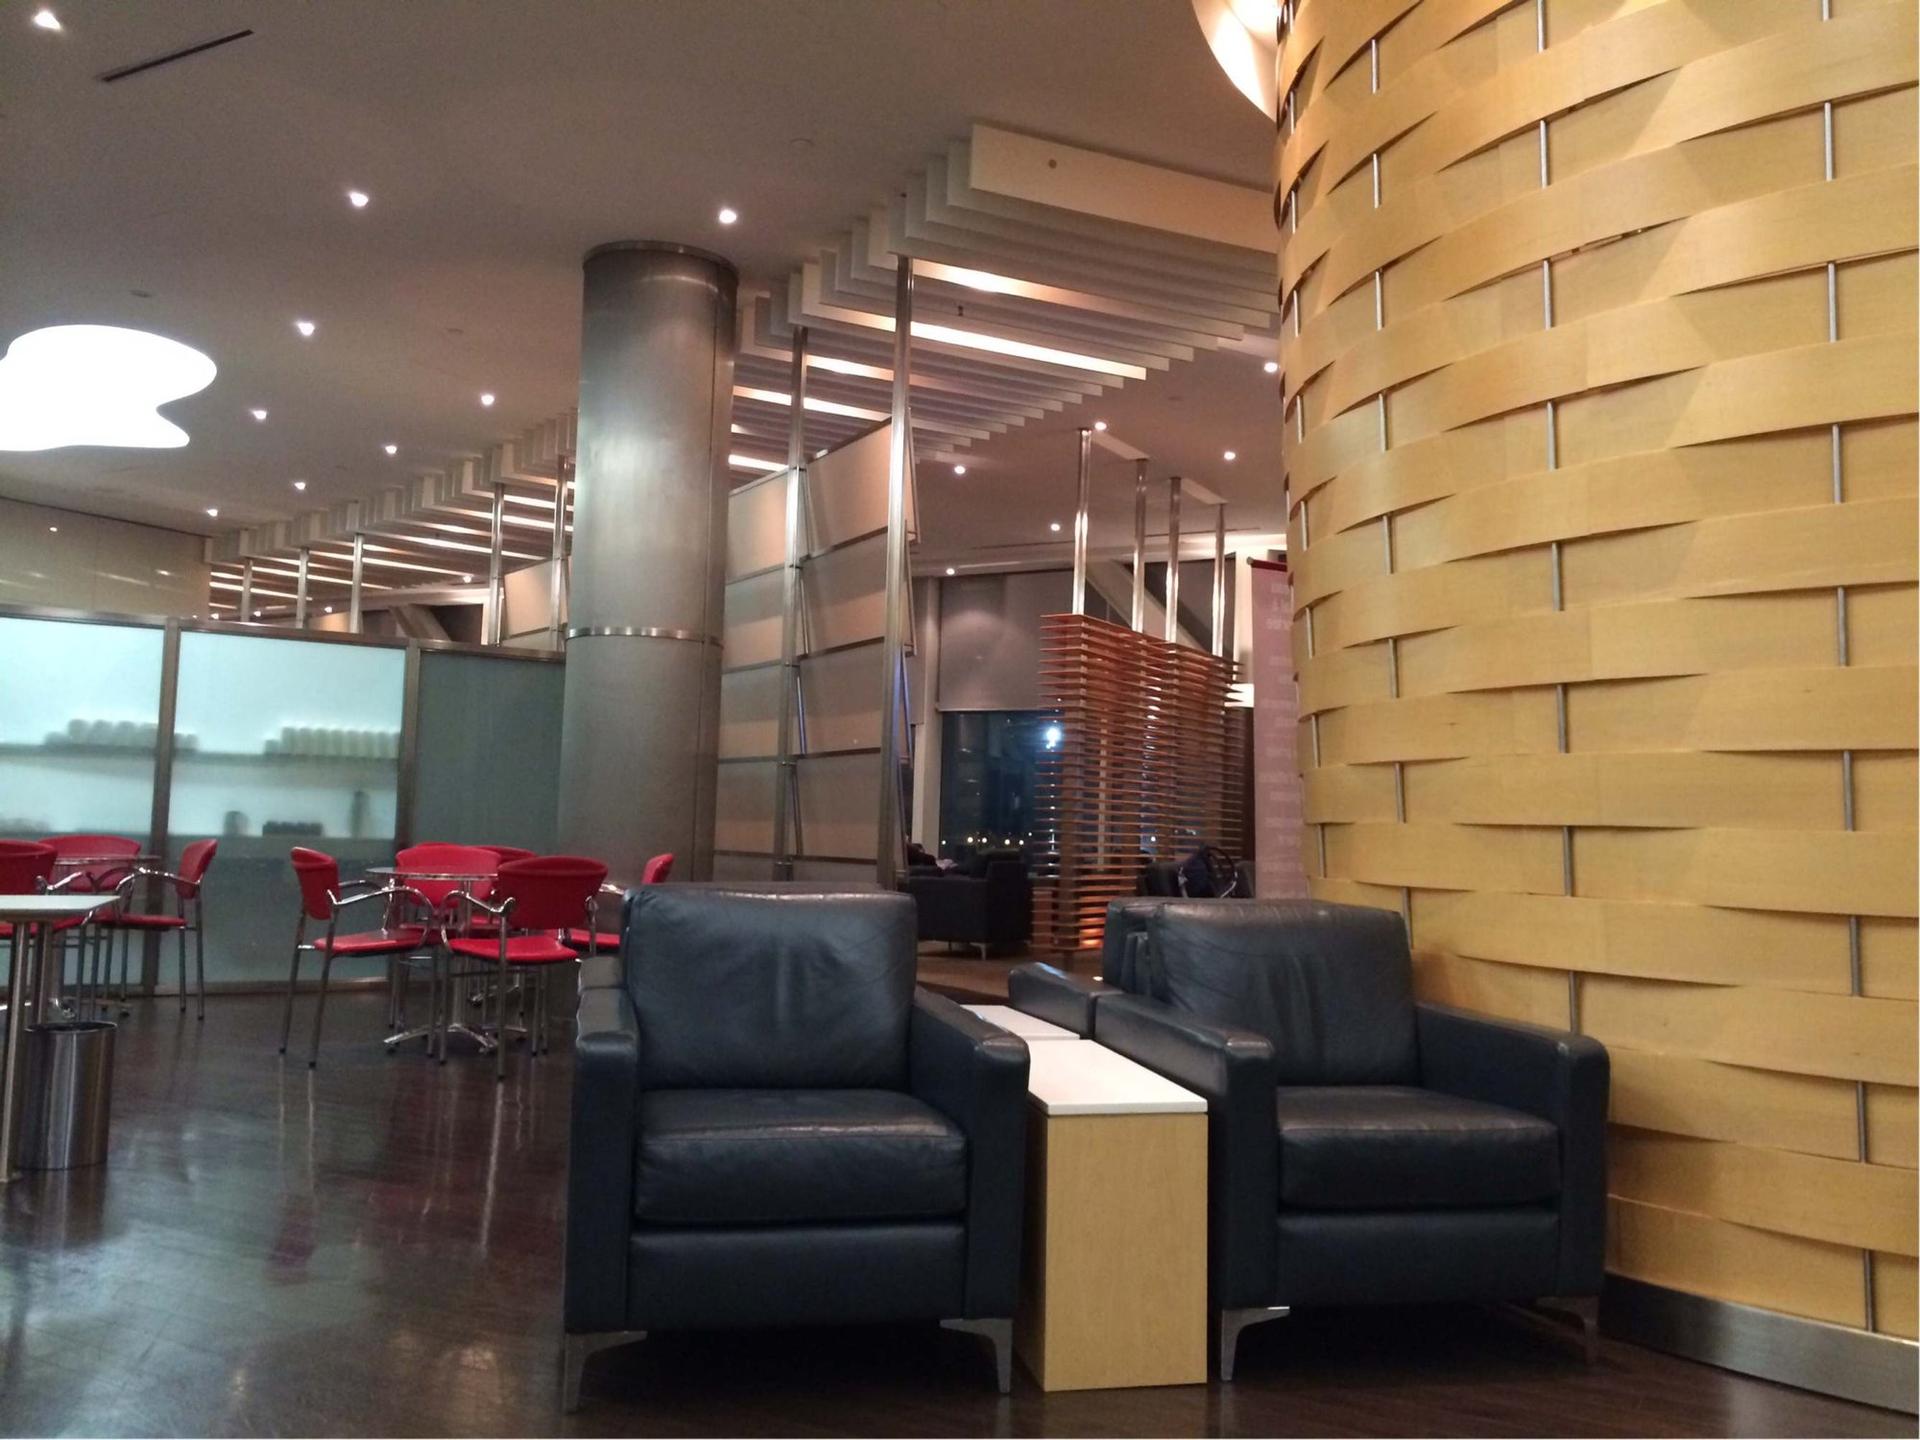 Air Canada Maple Leaf Lounge image 6 of 17